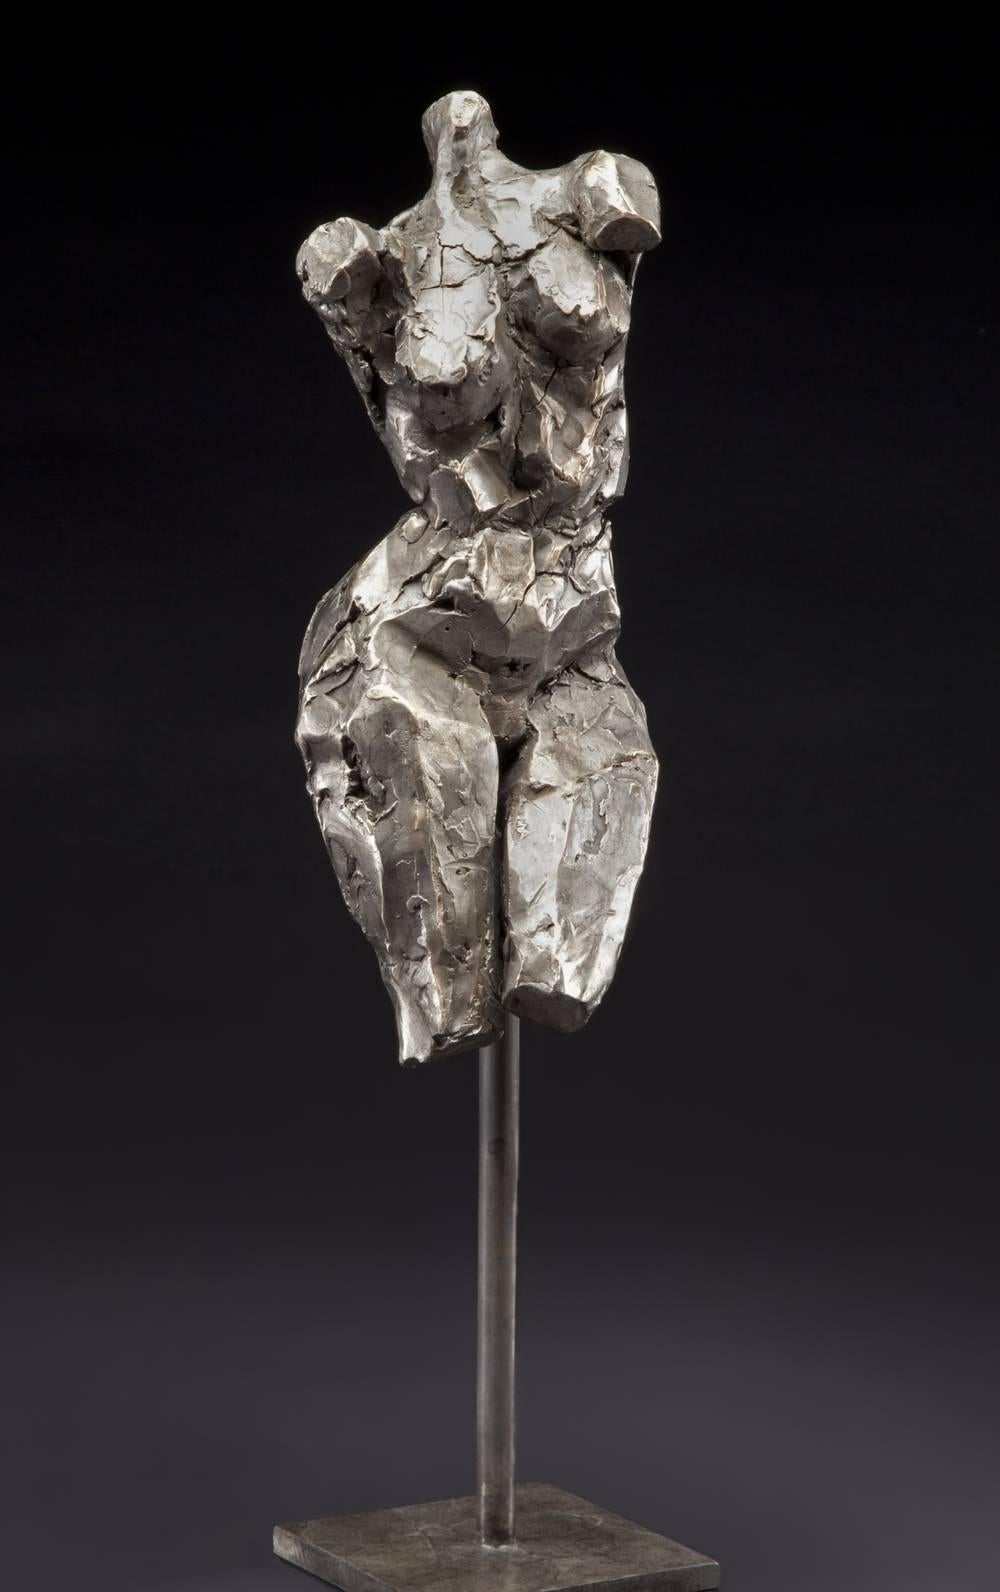 Gail Folwell Figurative Sculpture - Muse